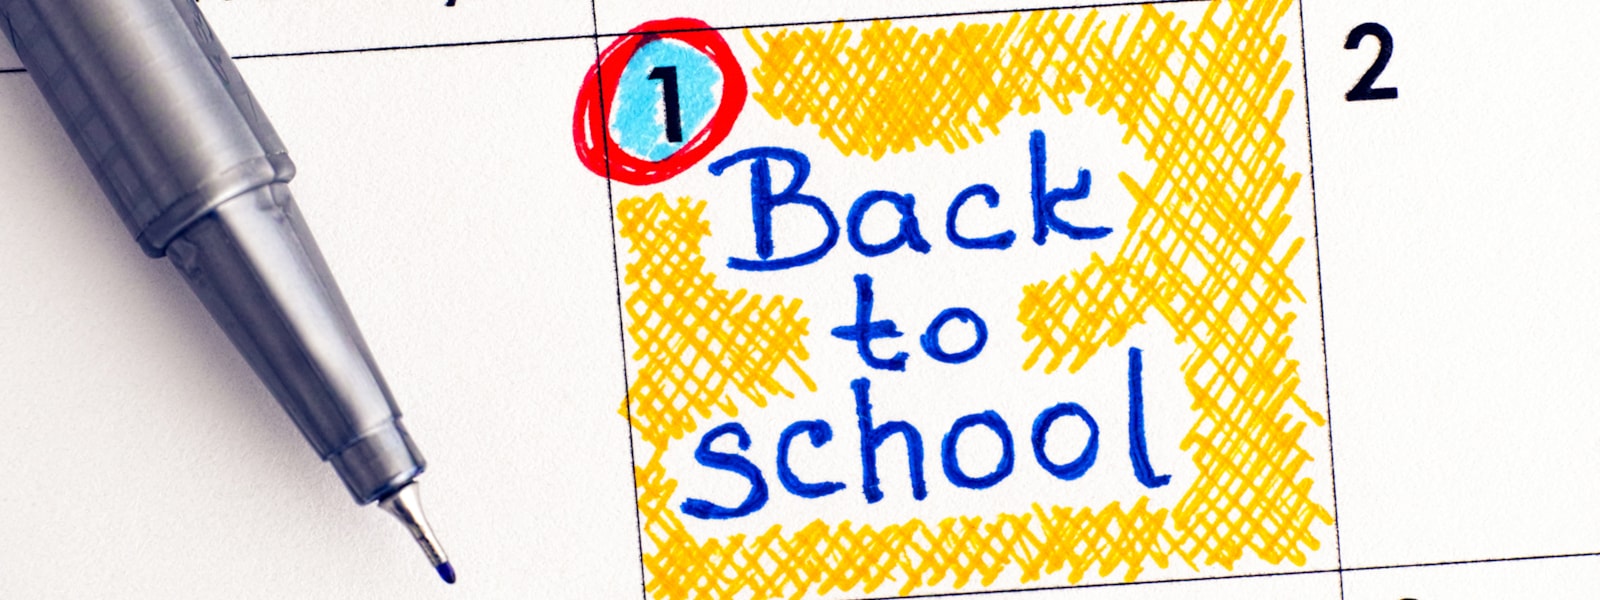 date circled on a calendar and 'back to school' written on it, pen sitting on calendar